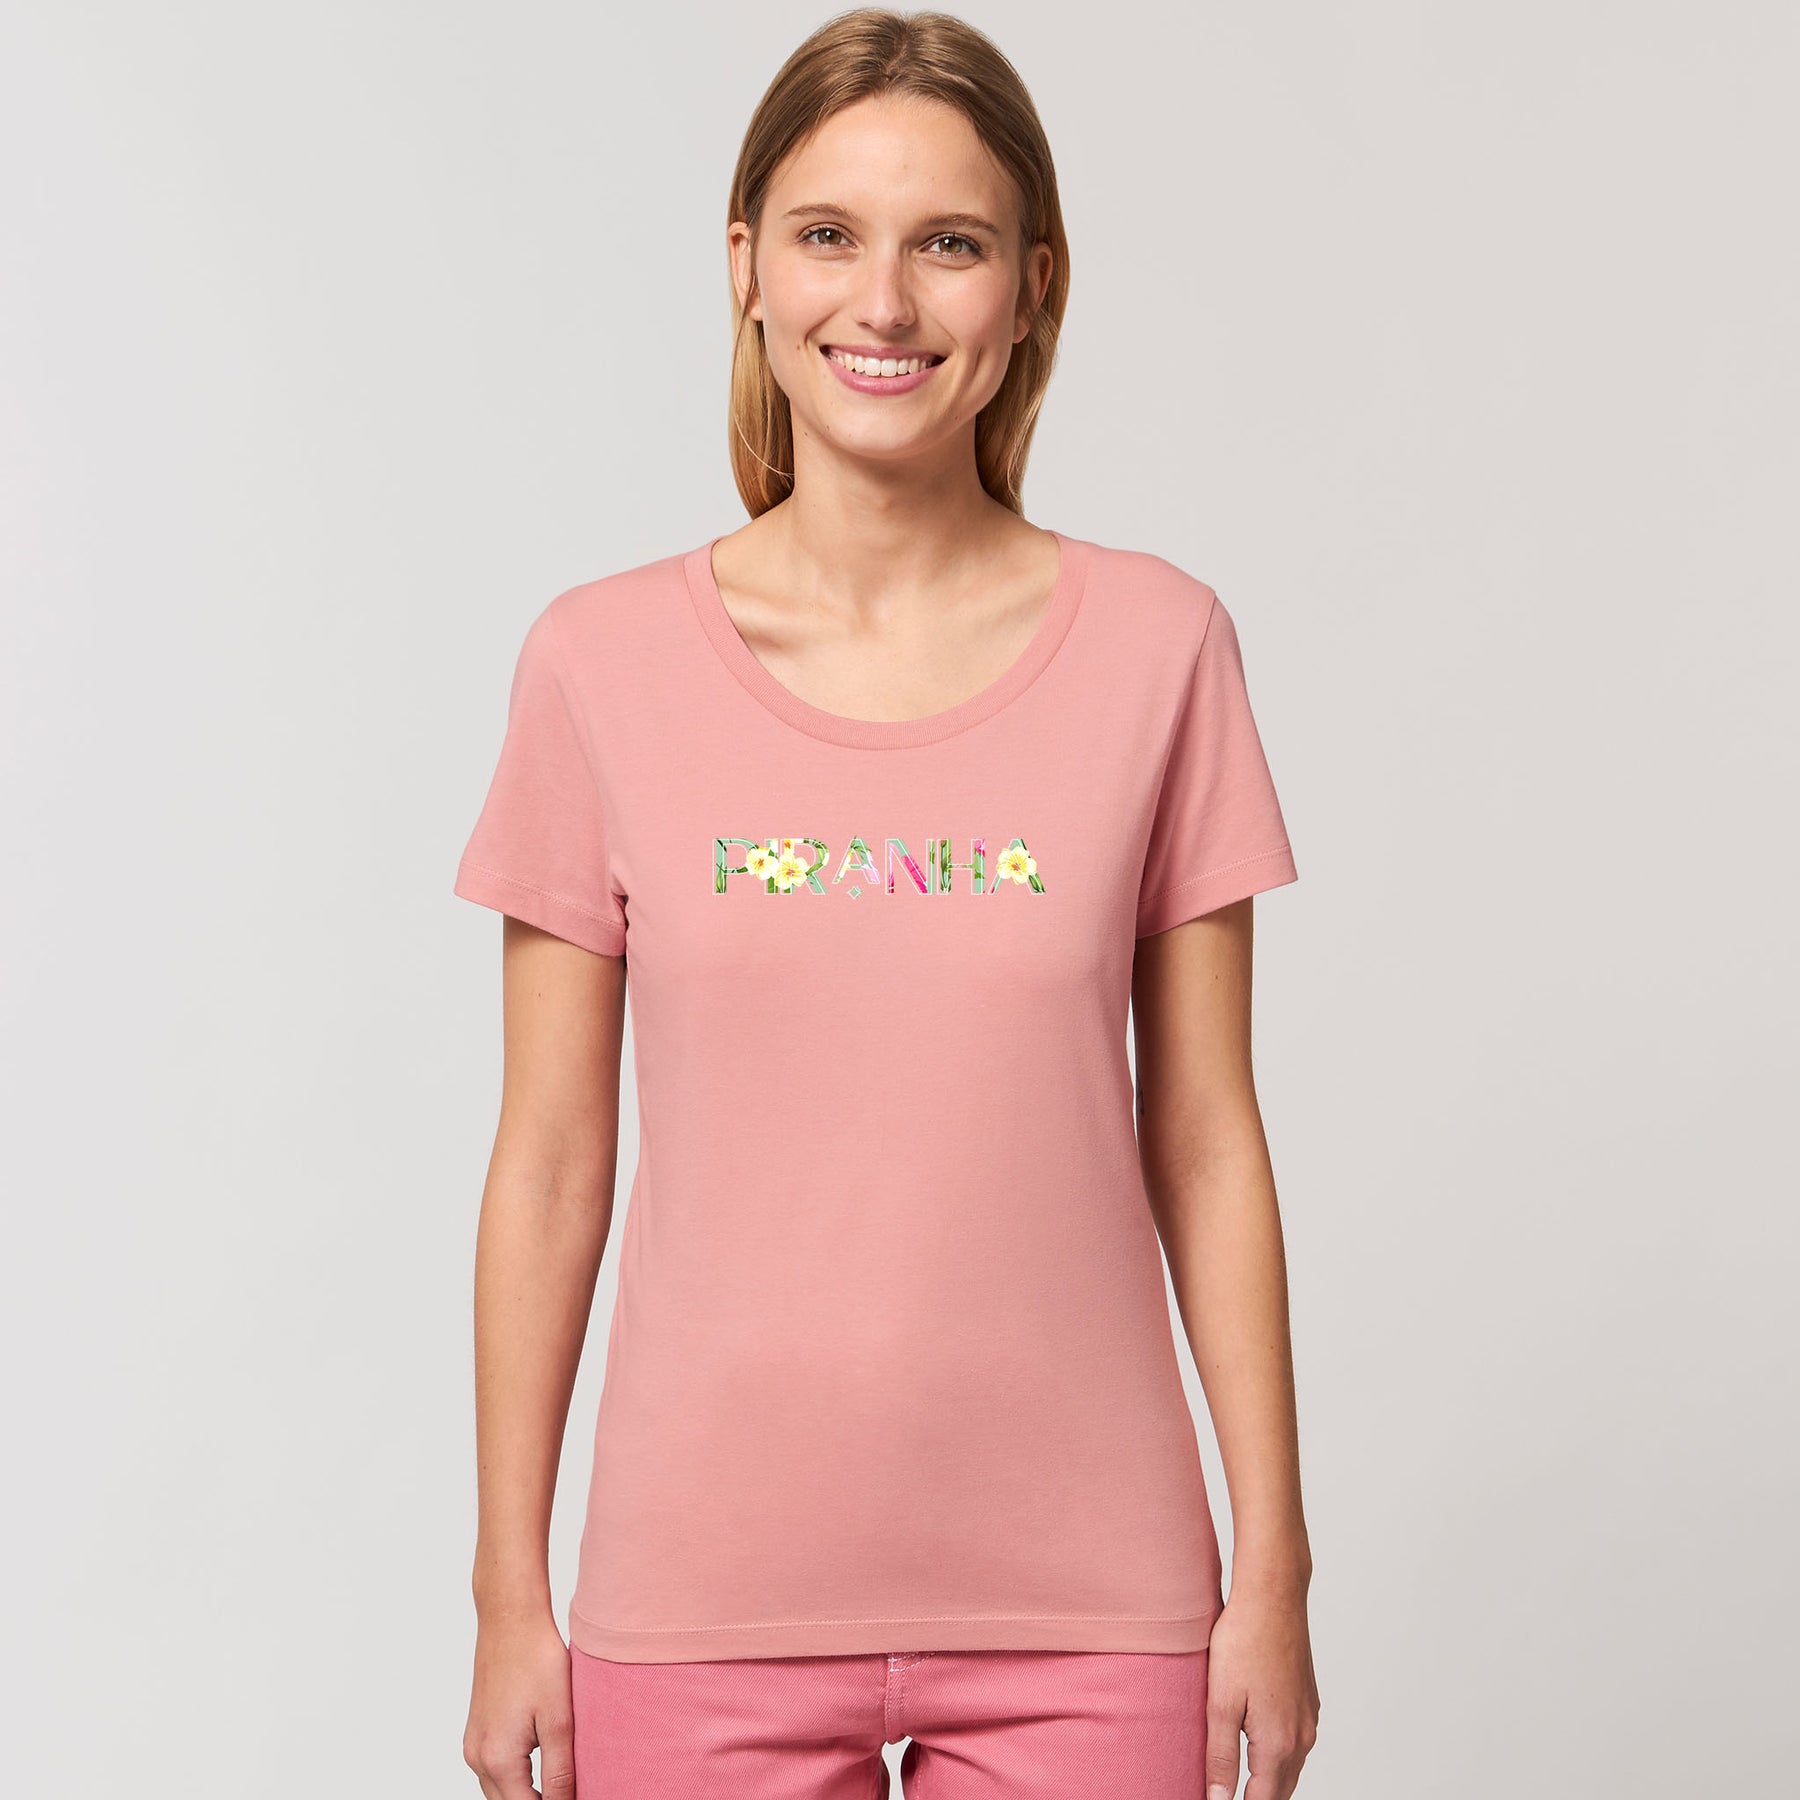 Piranha Lifestyle Womens Fitted T-Shirt: Canyon Pink (Floral)